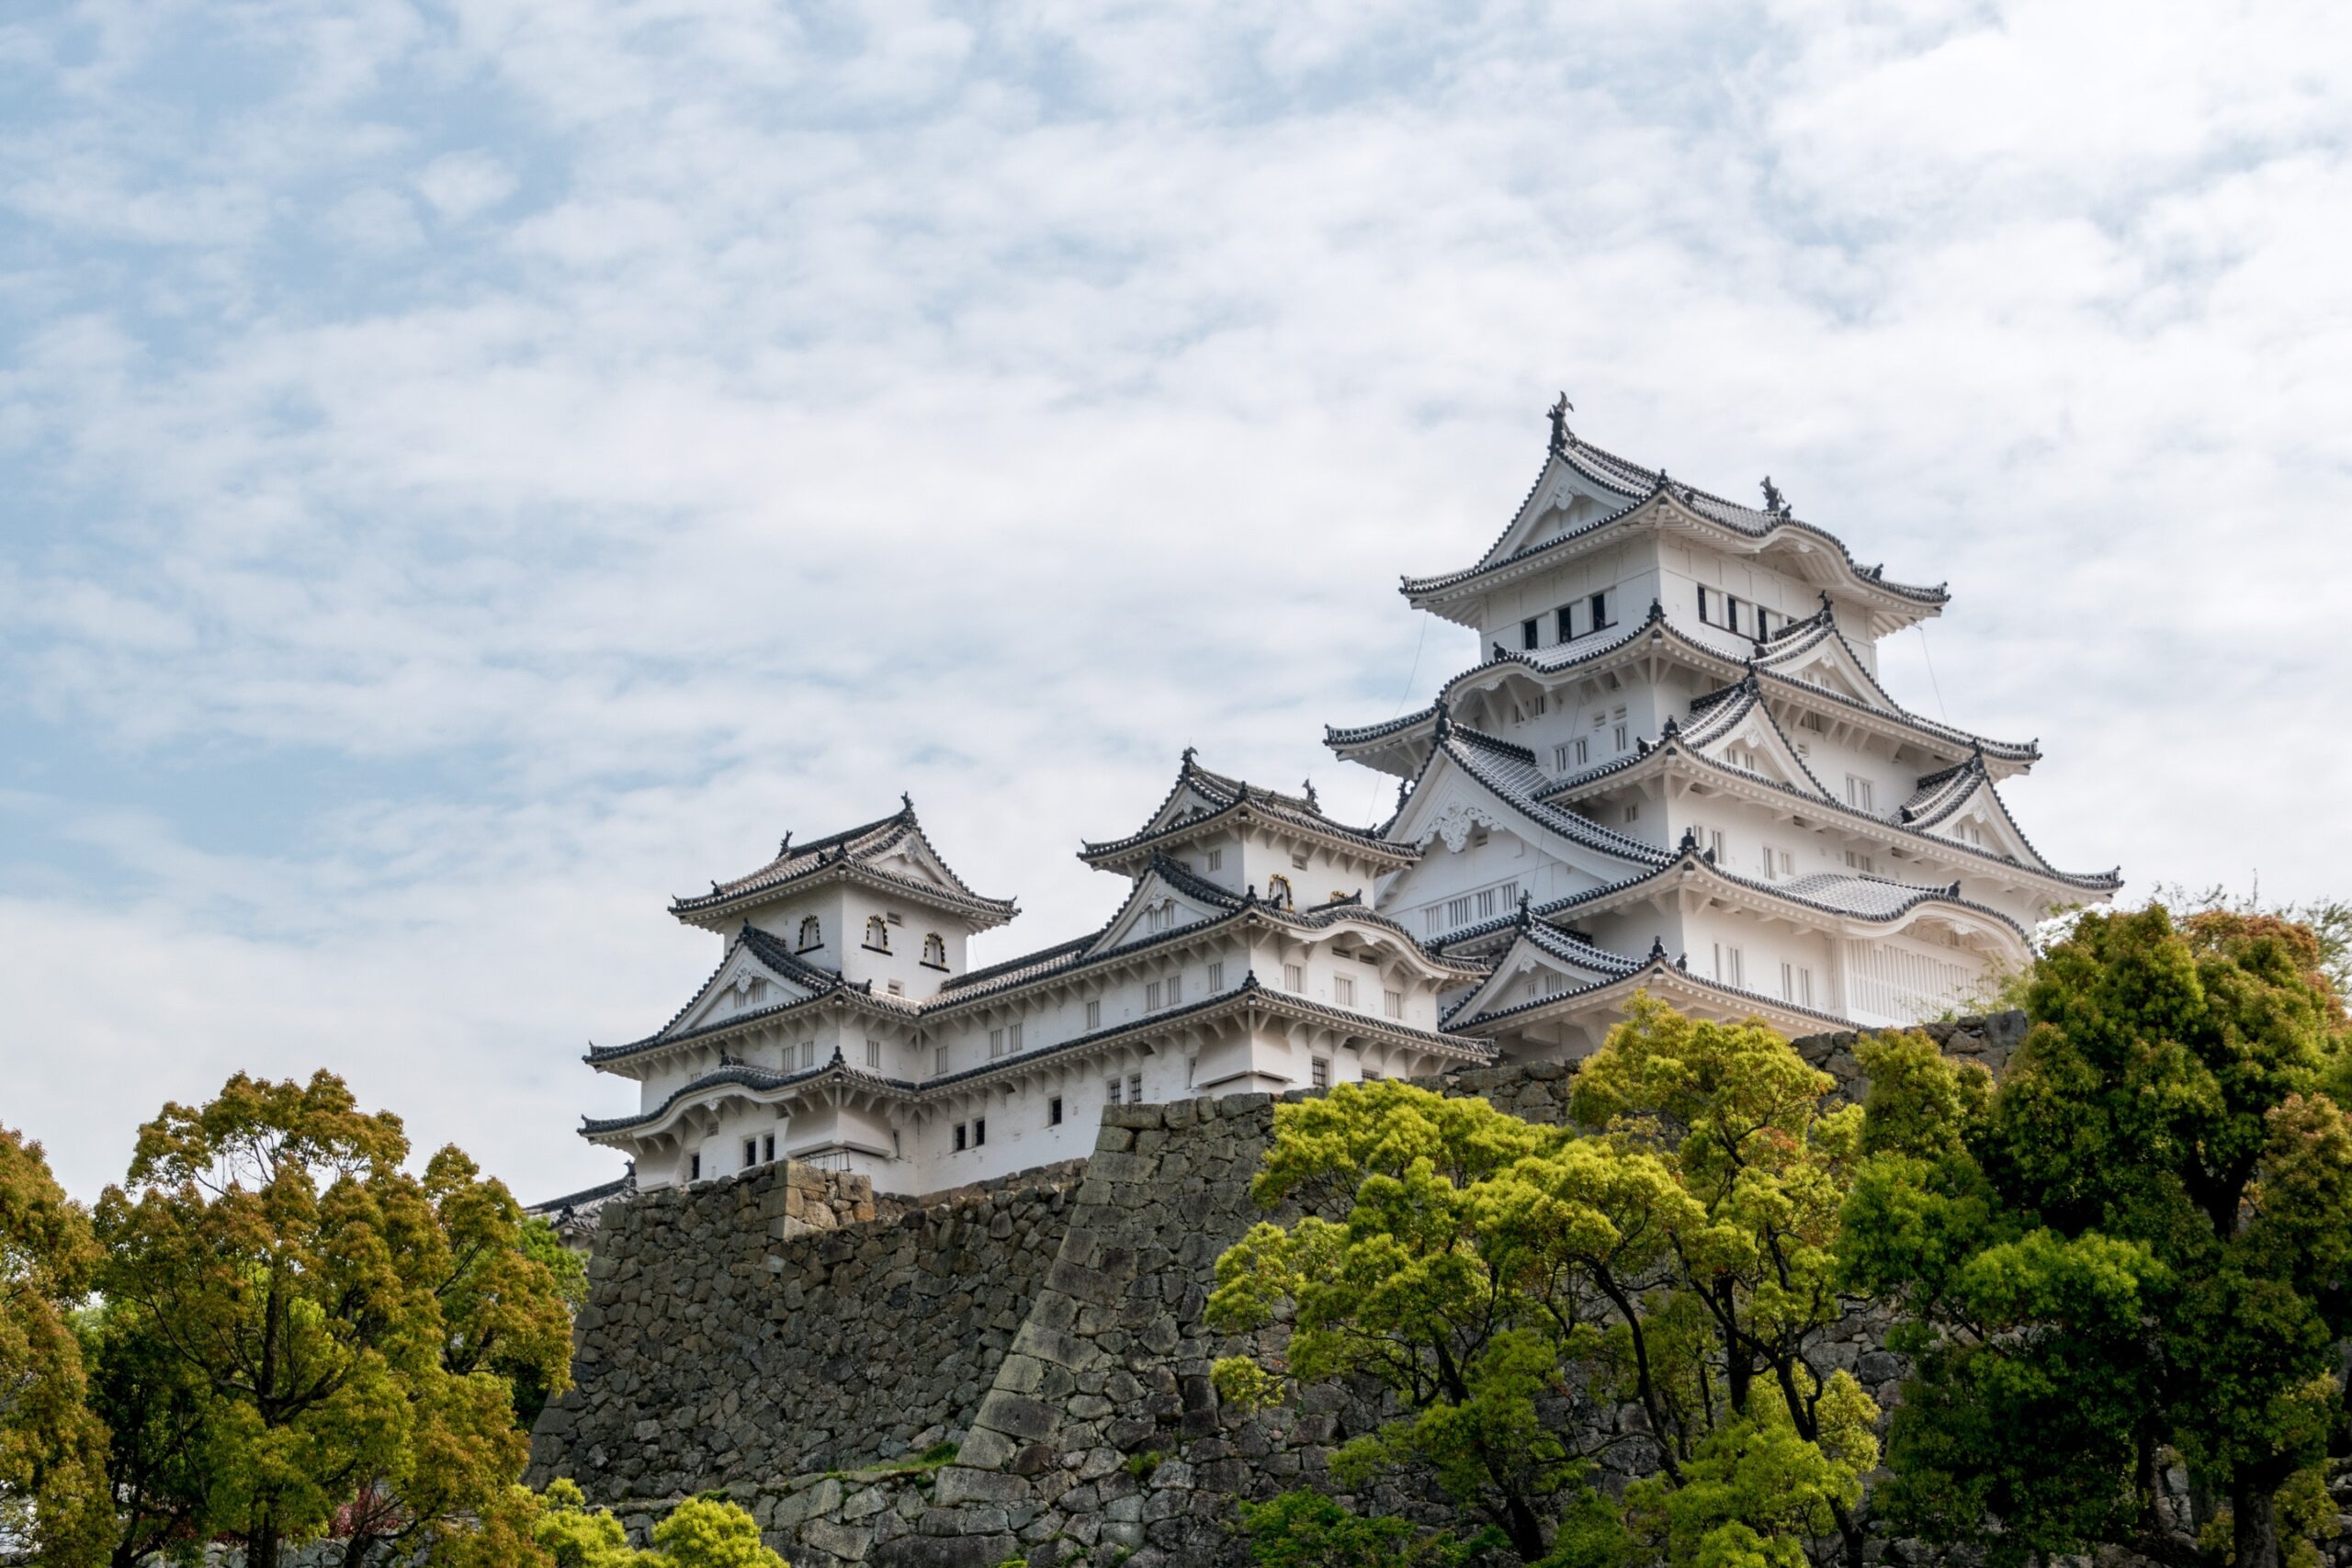 The city of Himeji is one of the nicest southern destinations for cherry tree viewing. The famous Himeji Castle is a popular attraction that many visitors view the sakura from. 
pictured: The tall and white Himeji Castle, which sits on the Himeyama Hill 